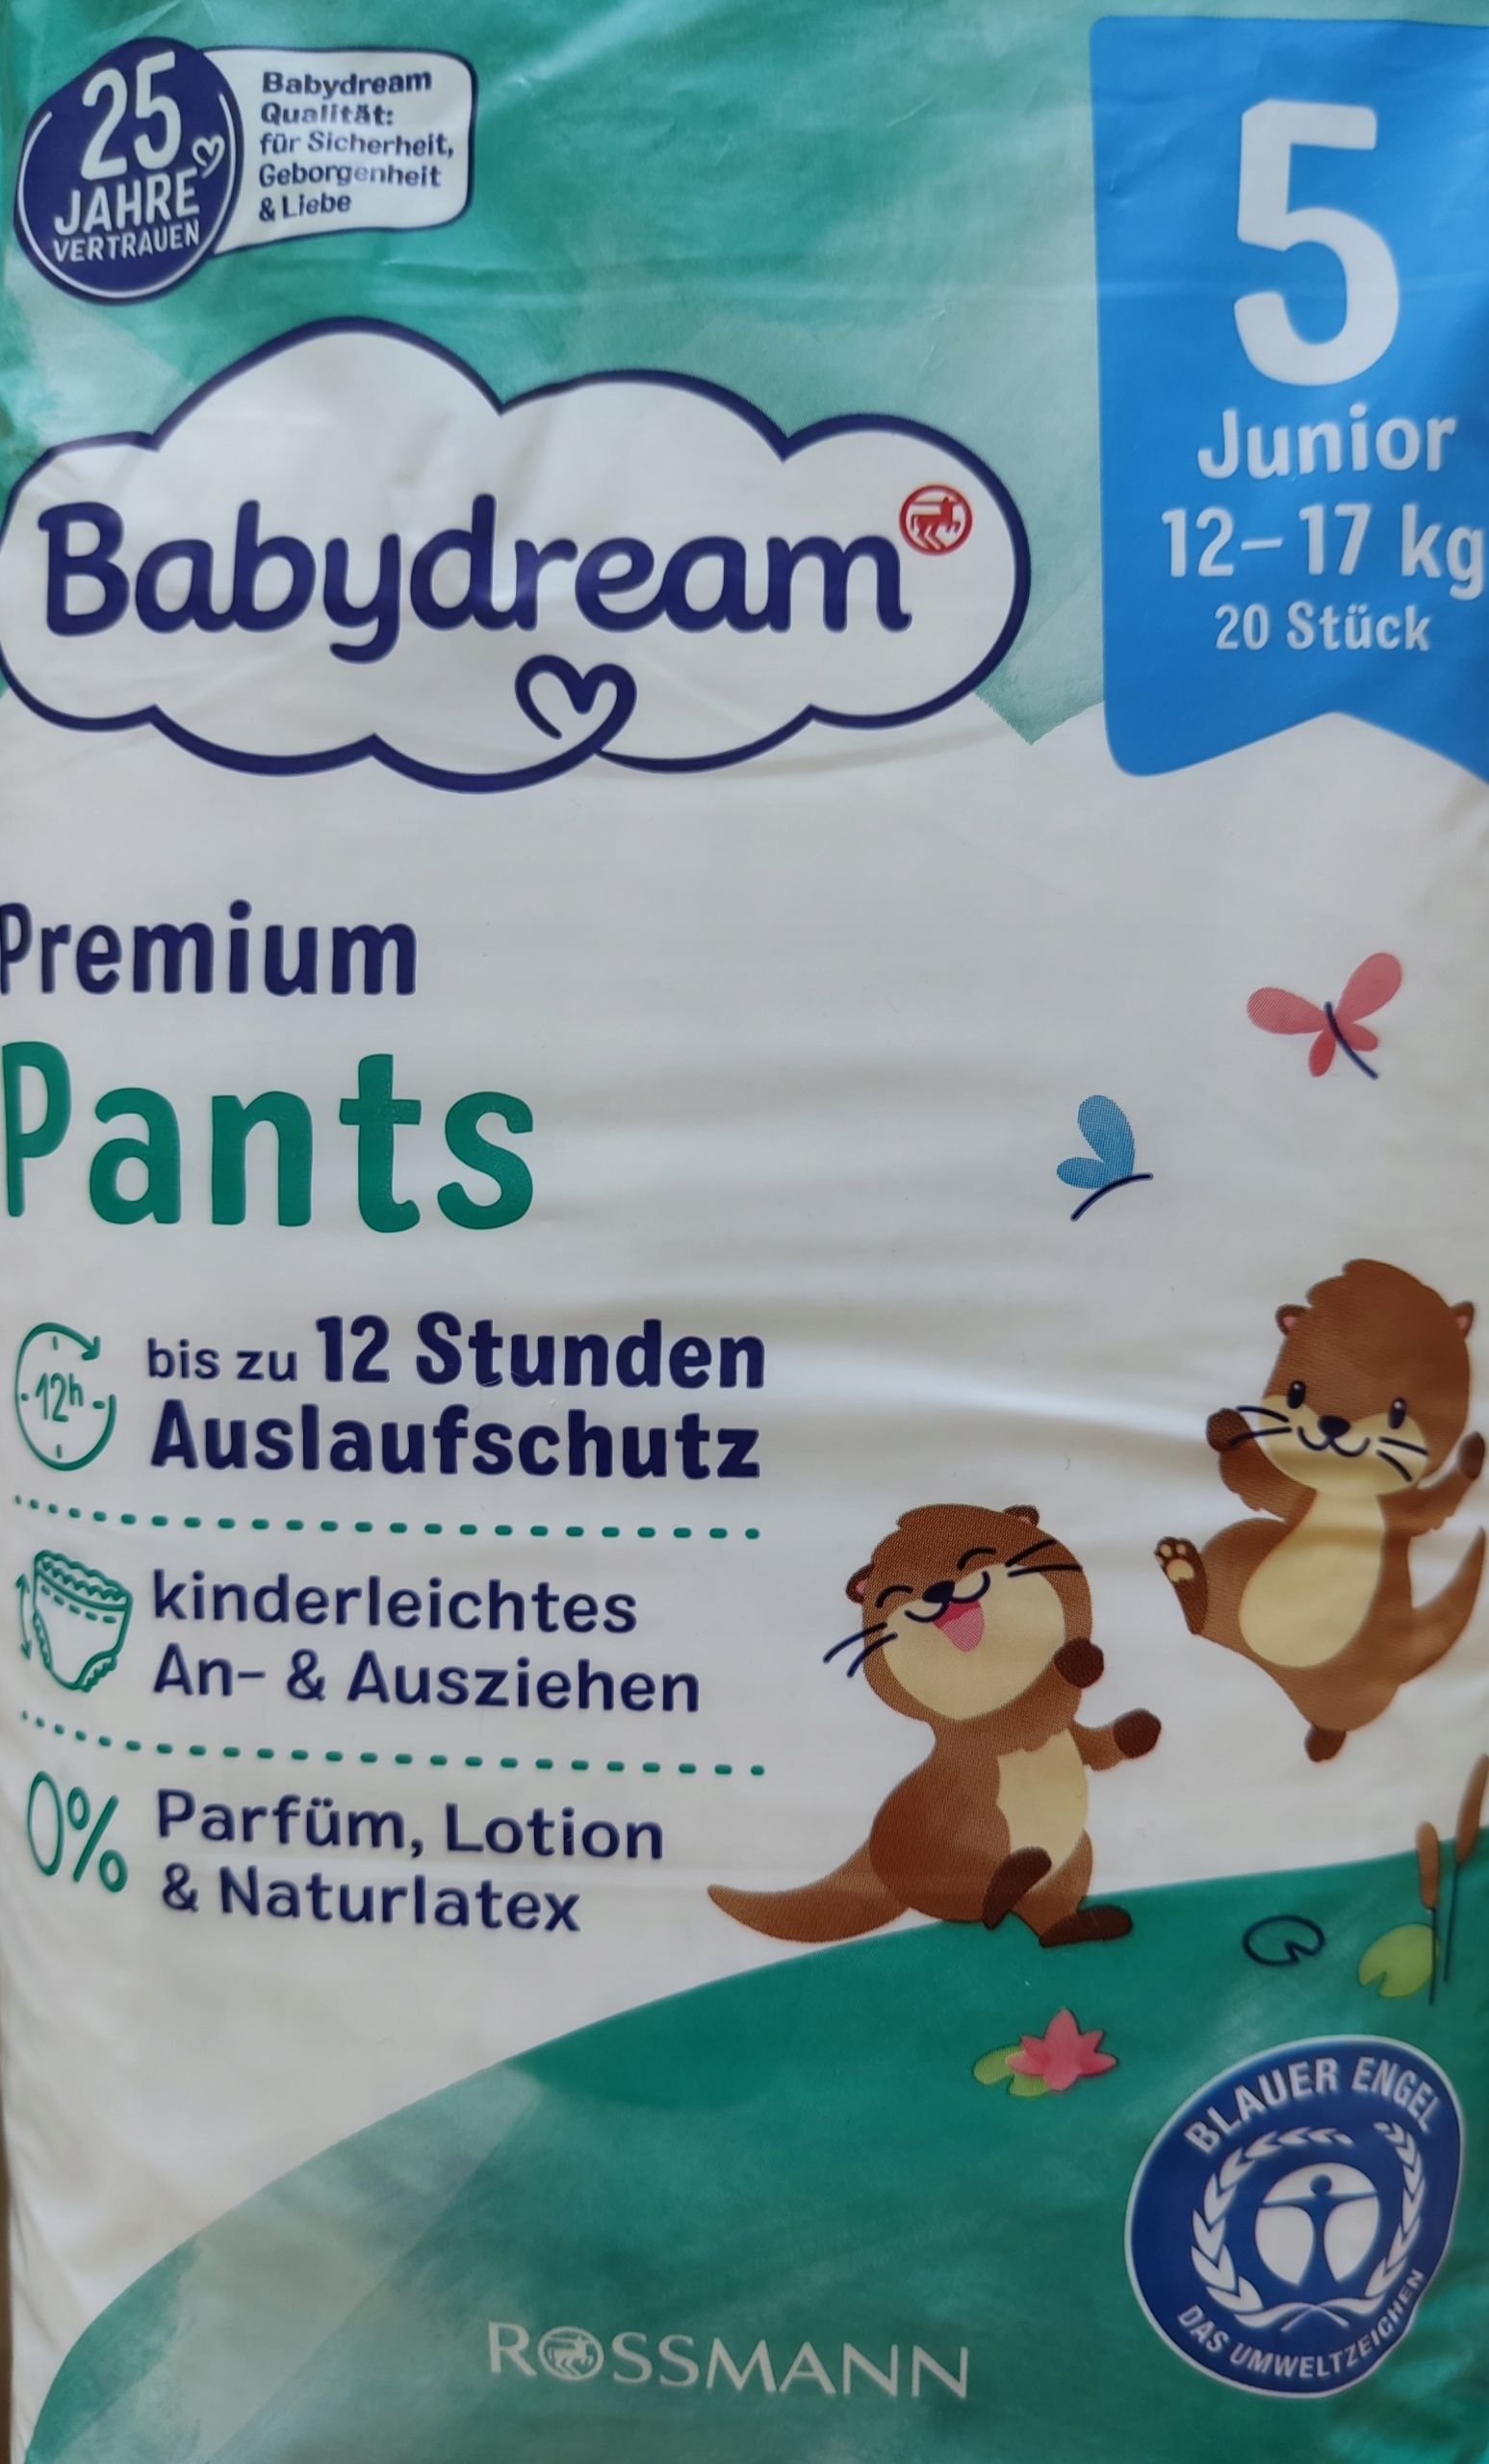 pampers premium protection new baby rozmiar 1 23er